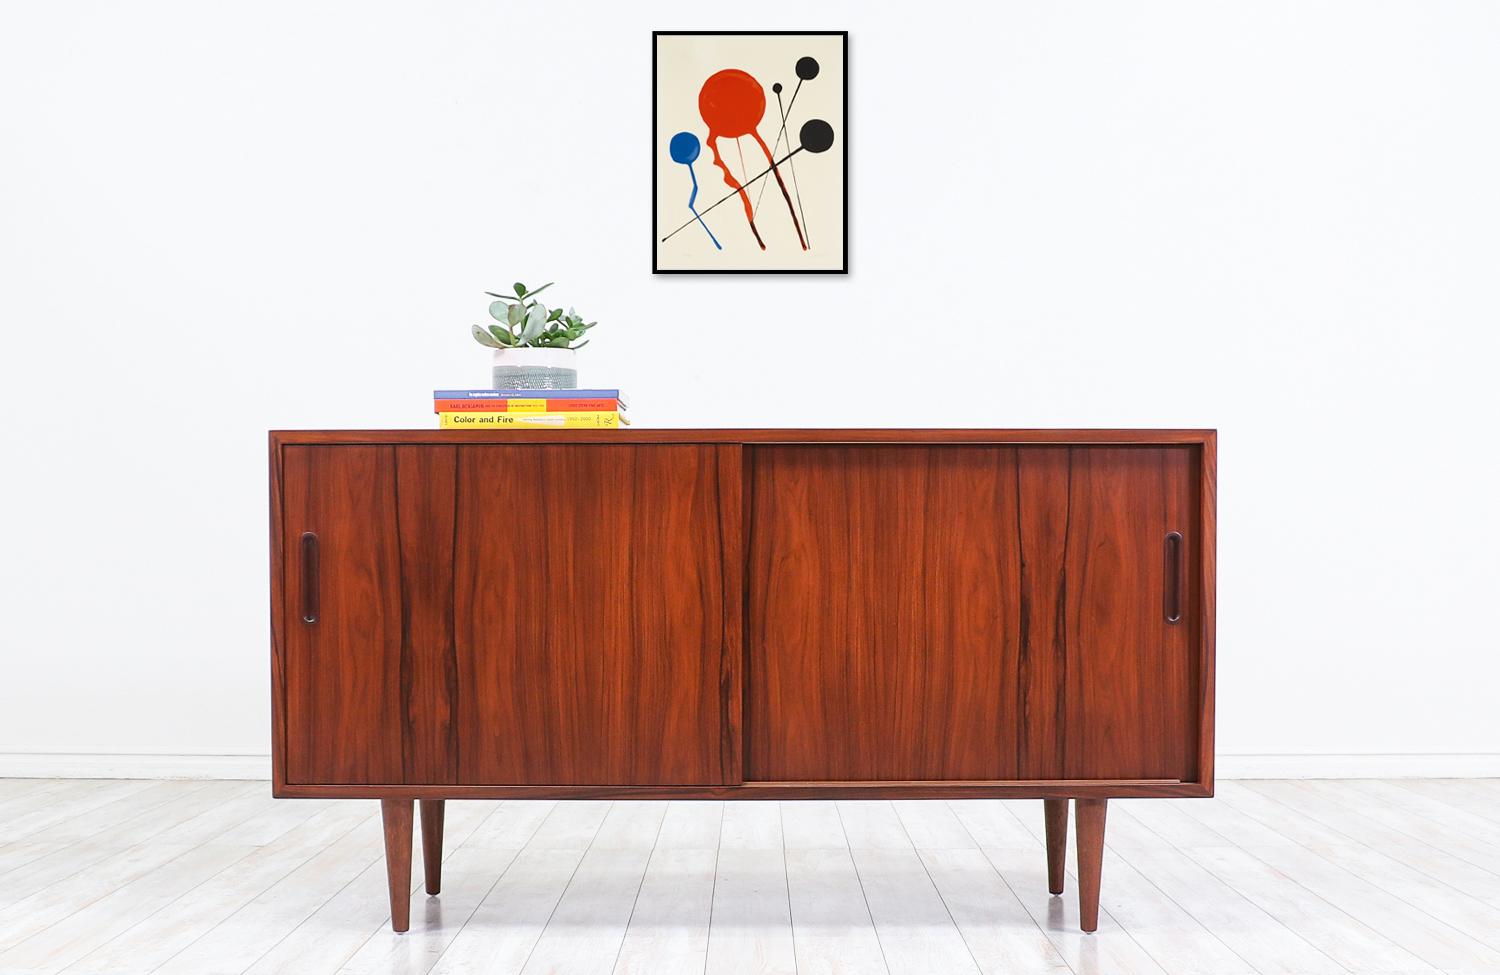 Elegant modern credenza designed by Carlo Jensen for Hundevad & Co. in Denmark circa 1960s. This compact credenza features an exotic rosewood grain detail and a sturdy construction sitting on four classic tapered legs. Behind the sliding doors, they